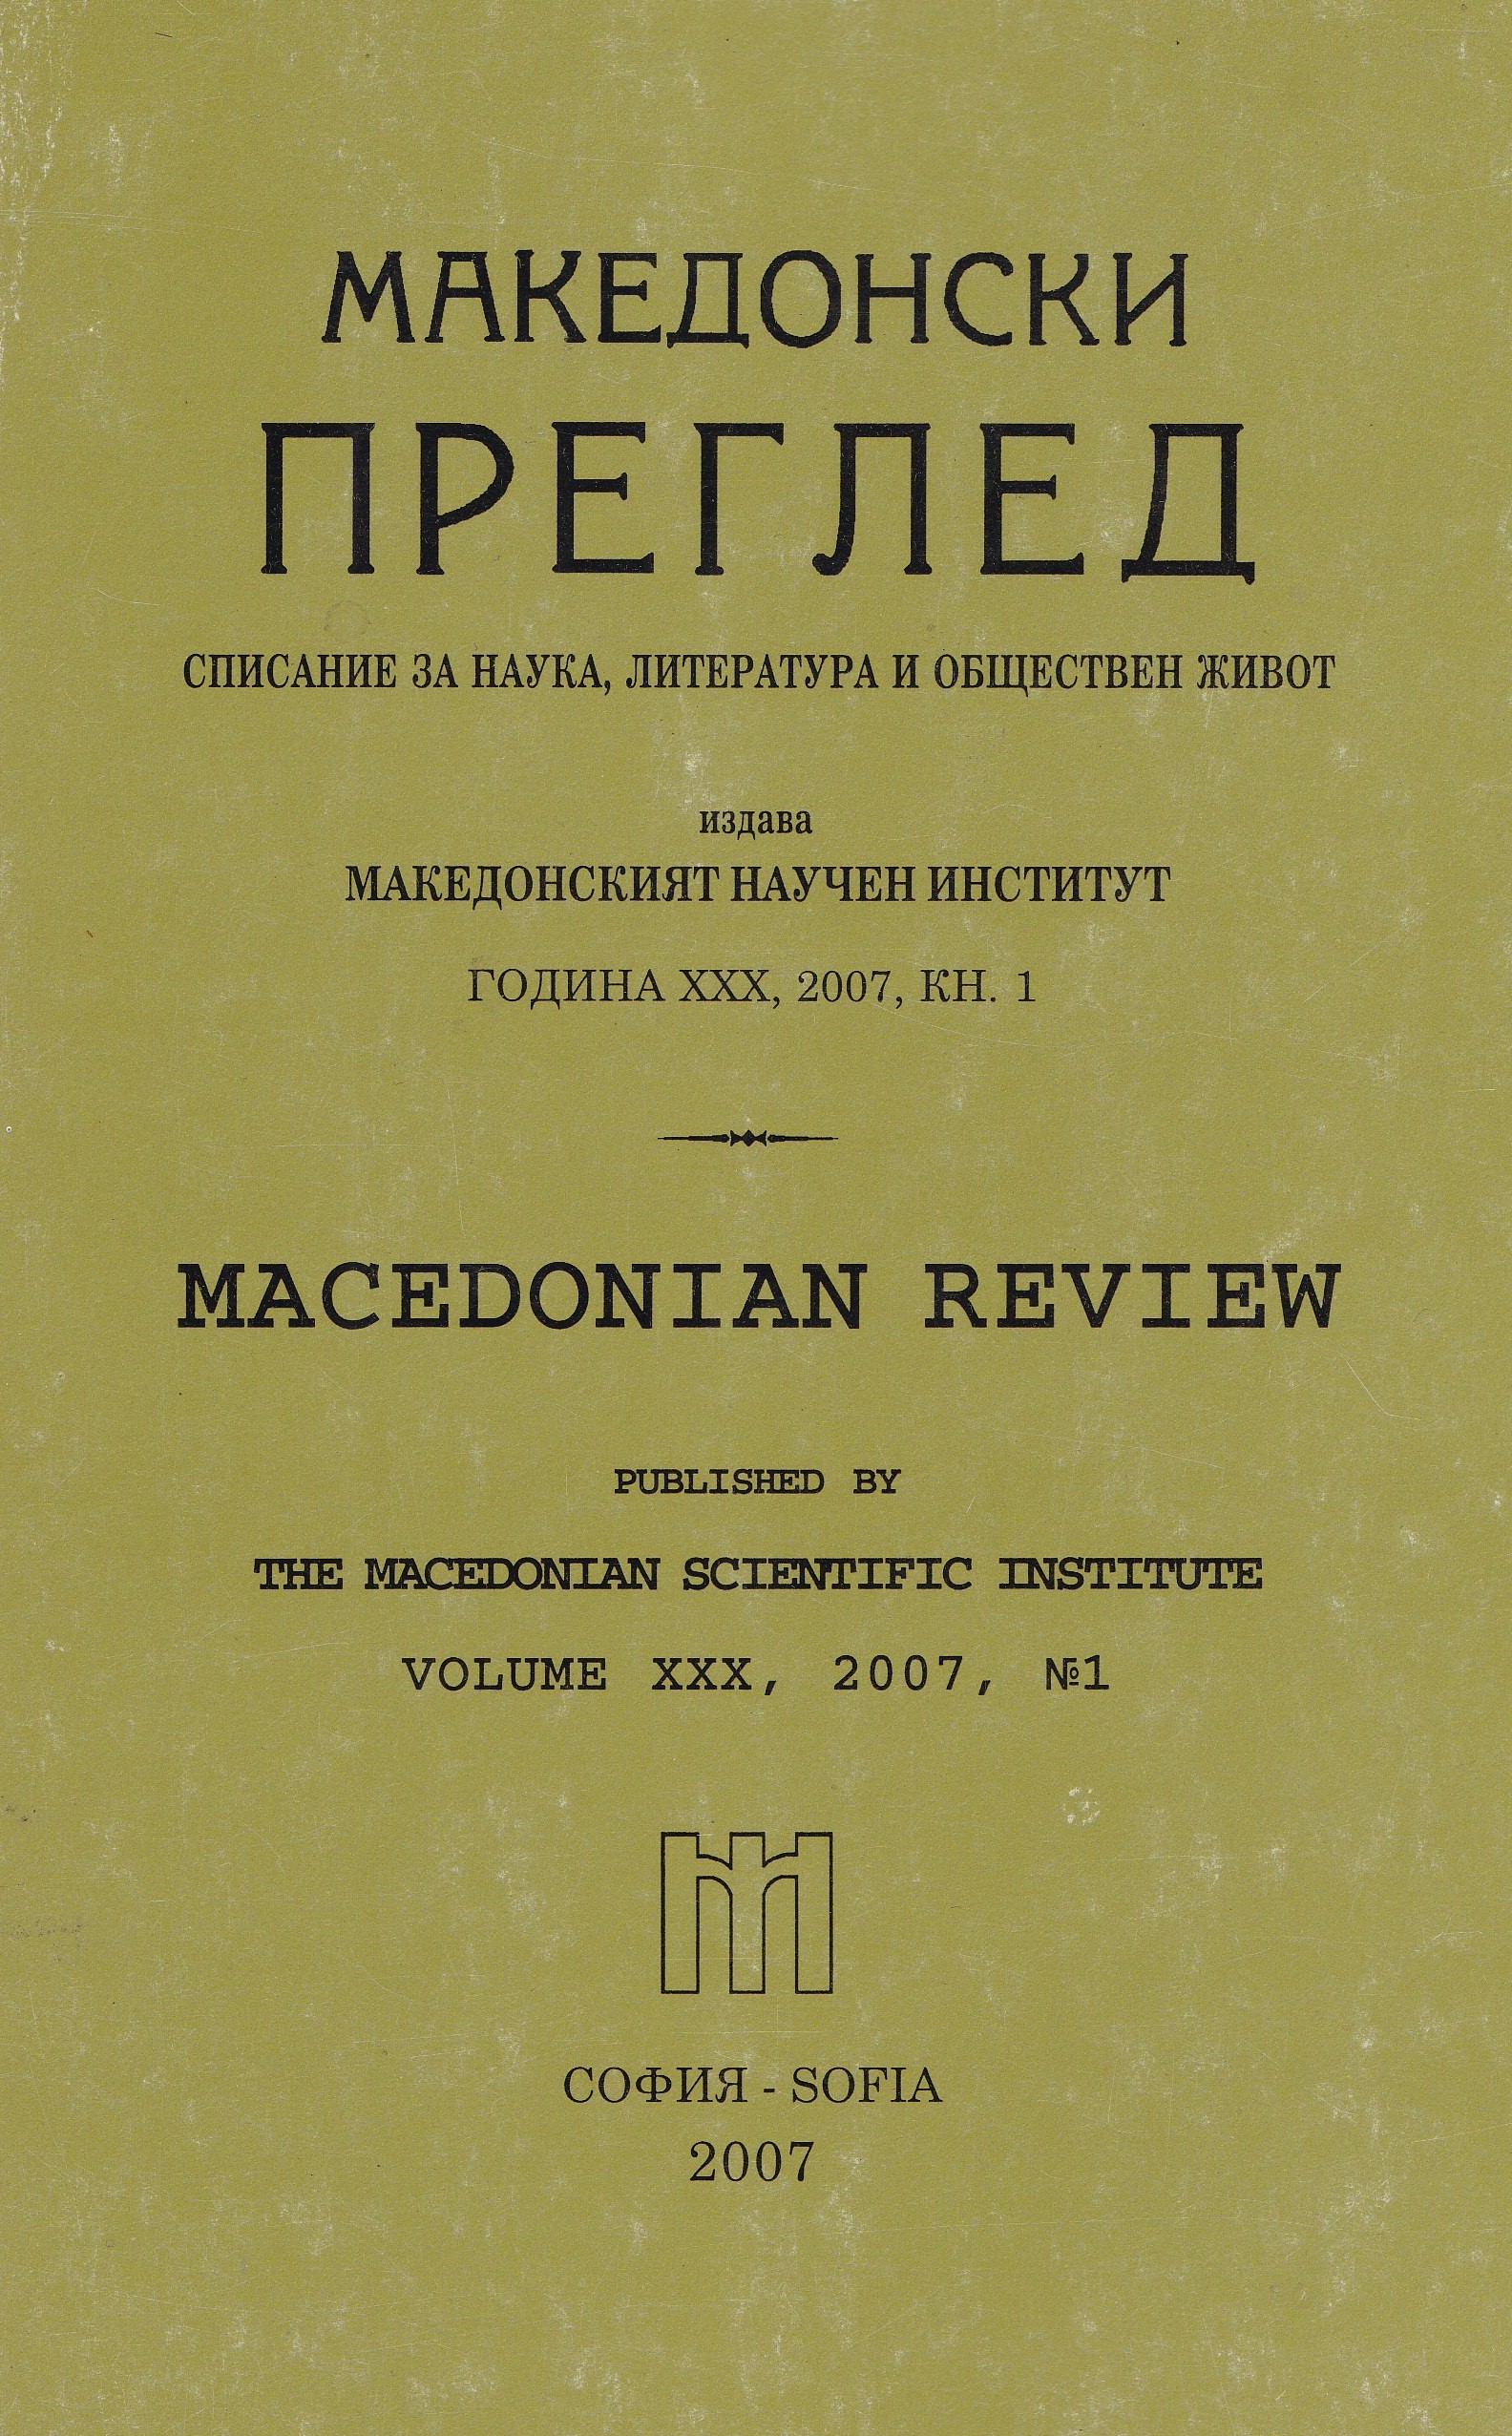 Dimitros Golis. The Macedonian Research Institute – promoter of the Bulgarian revisionism (1923-1947), Thessalonici, 2005, 316 p.) Cover Image